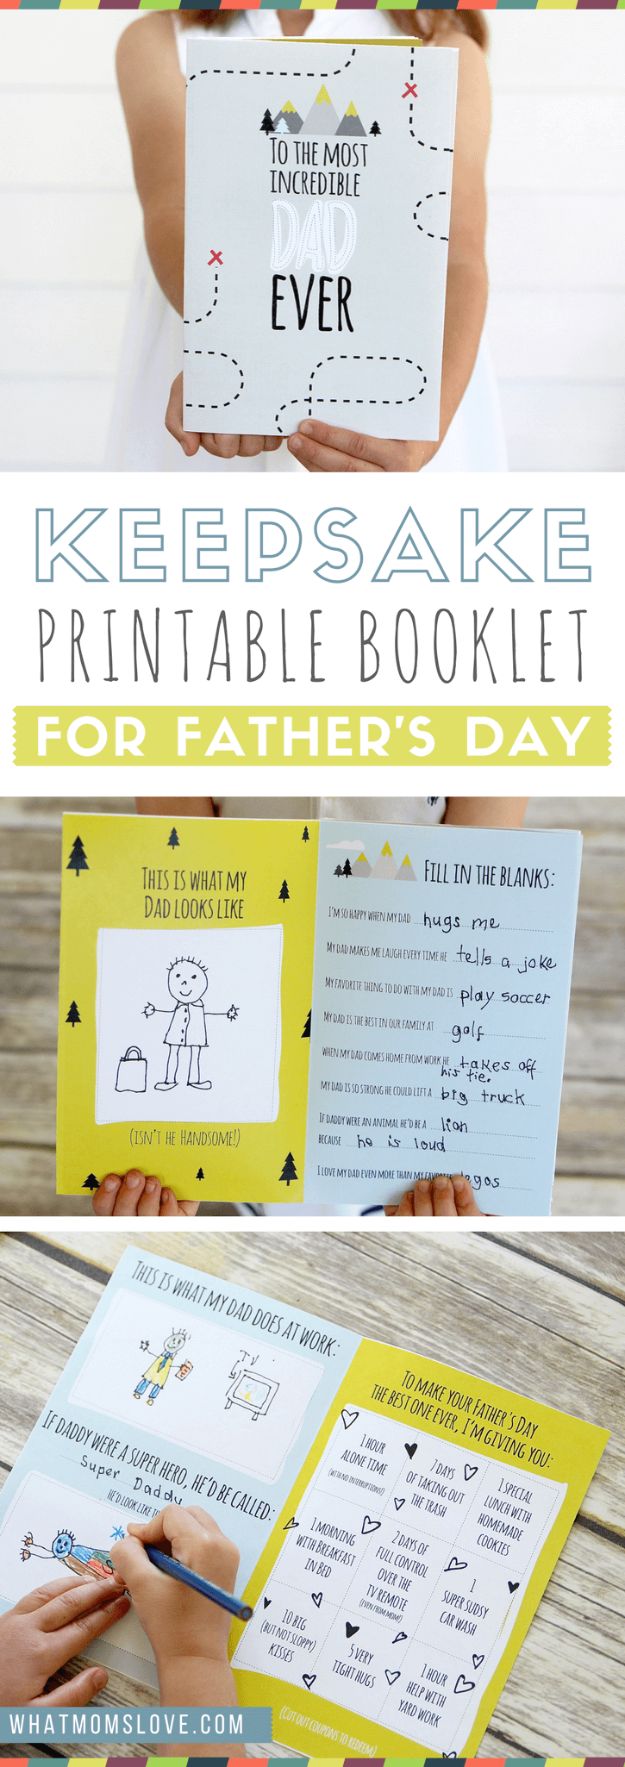 Best Free Printables for Crafts - Keepsake Printable Booklet - Quotes, Templates, Paper Projects and Cards, DIY Gifts Cards, Stickers and Wall Art You Can Print At Home - Use These Fun Do It Yourself Template and Craft Ideas 